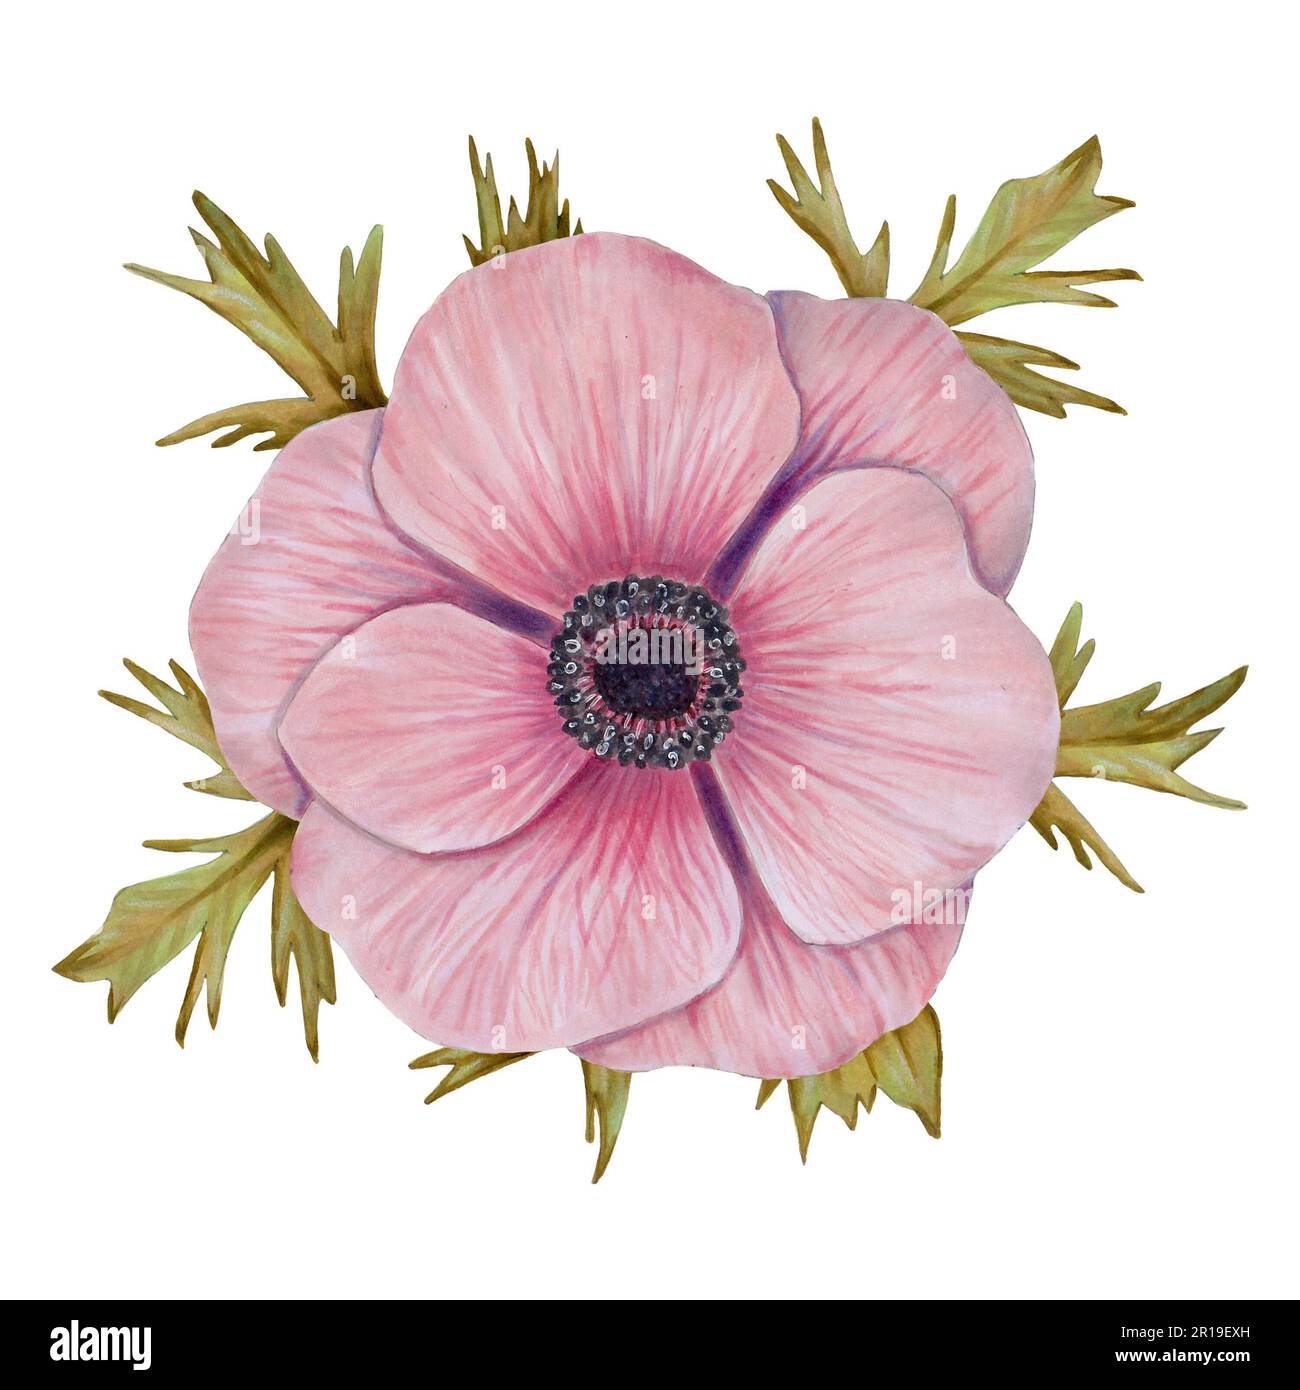 anemone hi-res Alamy - images photography 2 Botanical stock and illustration - Page